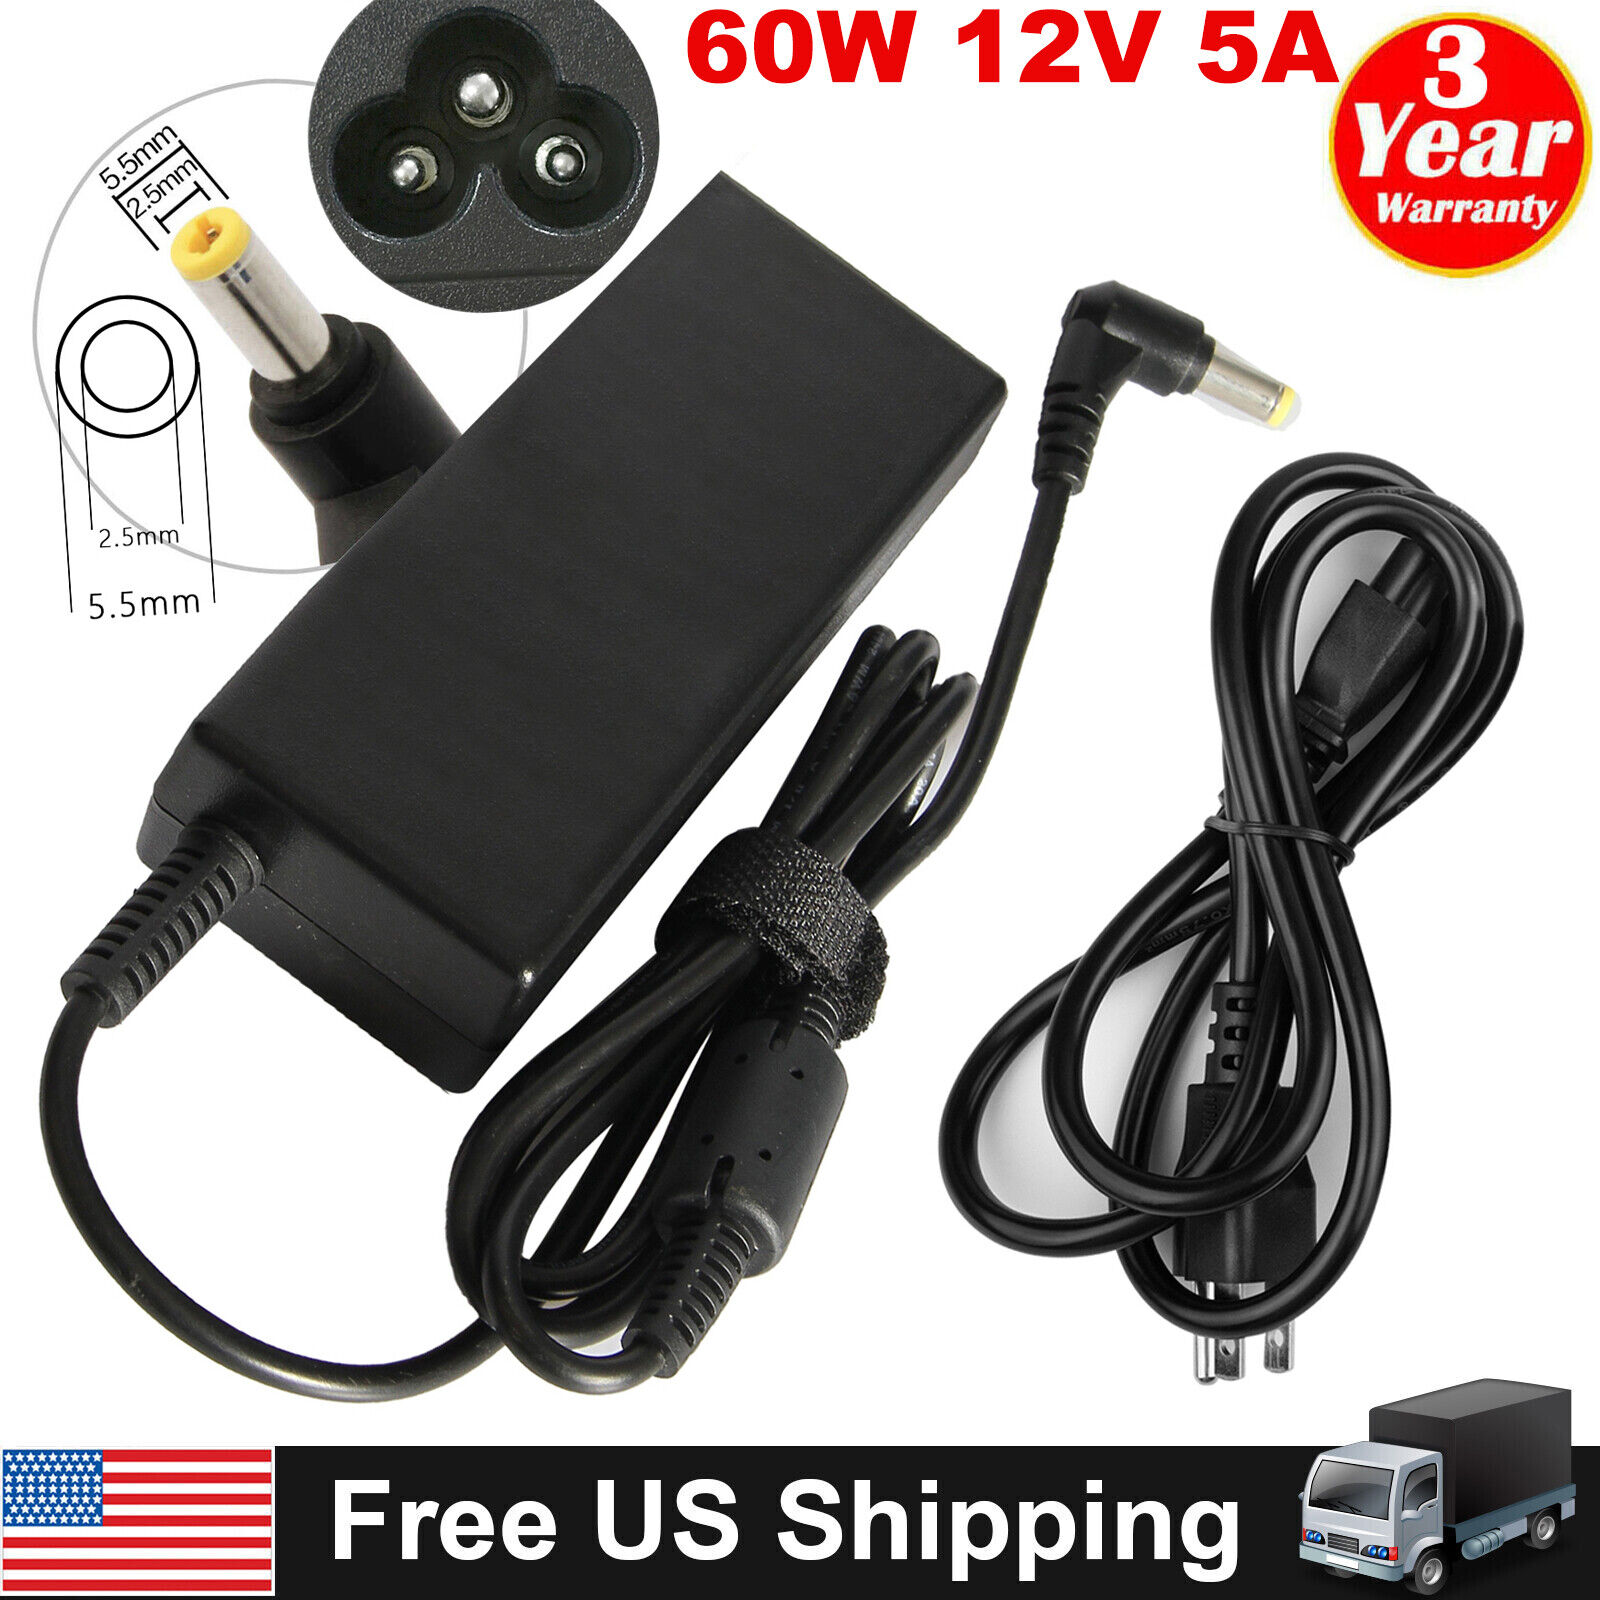 12V 5A 60W AC Adapter Power Supply Cord For audio amplifier, RC LiPo chargers